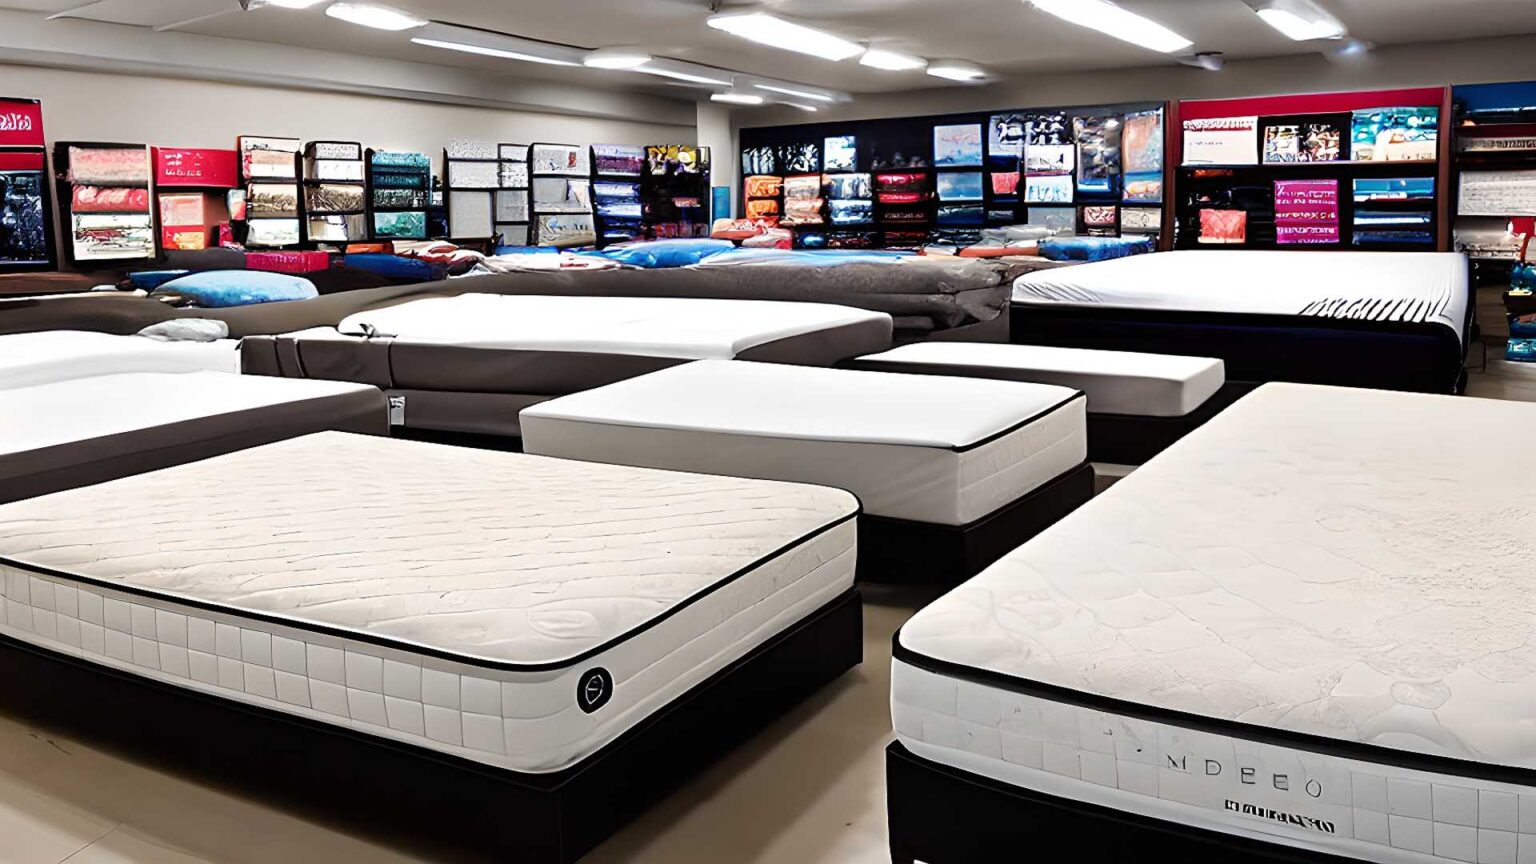 Mattress Stores, mattress dealers, and mattress retailers near me in Lake Forest, CA